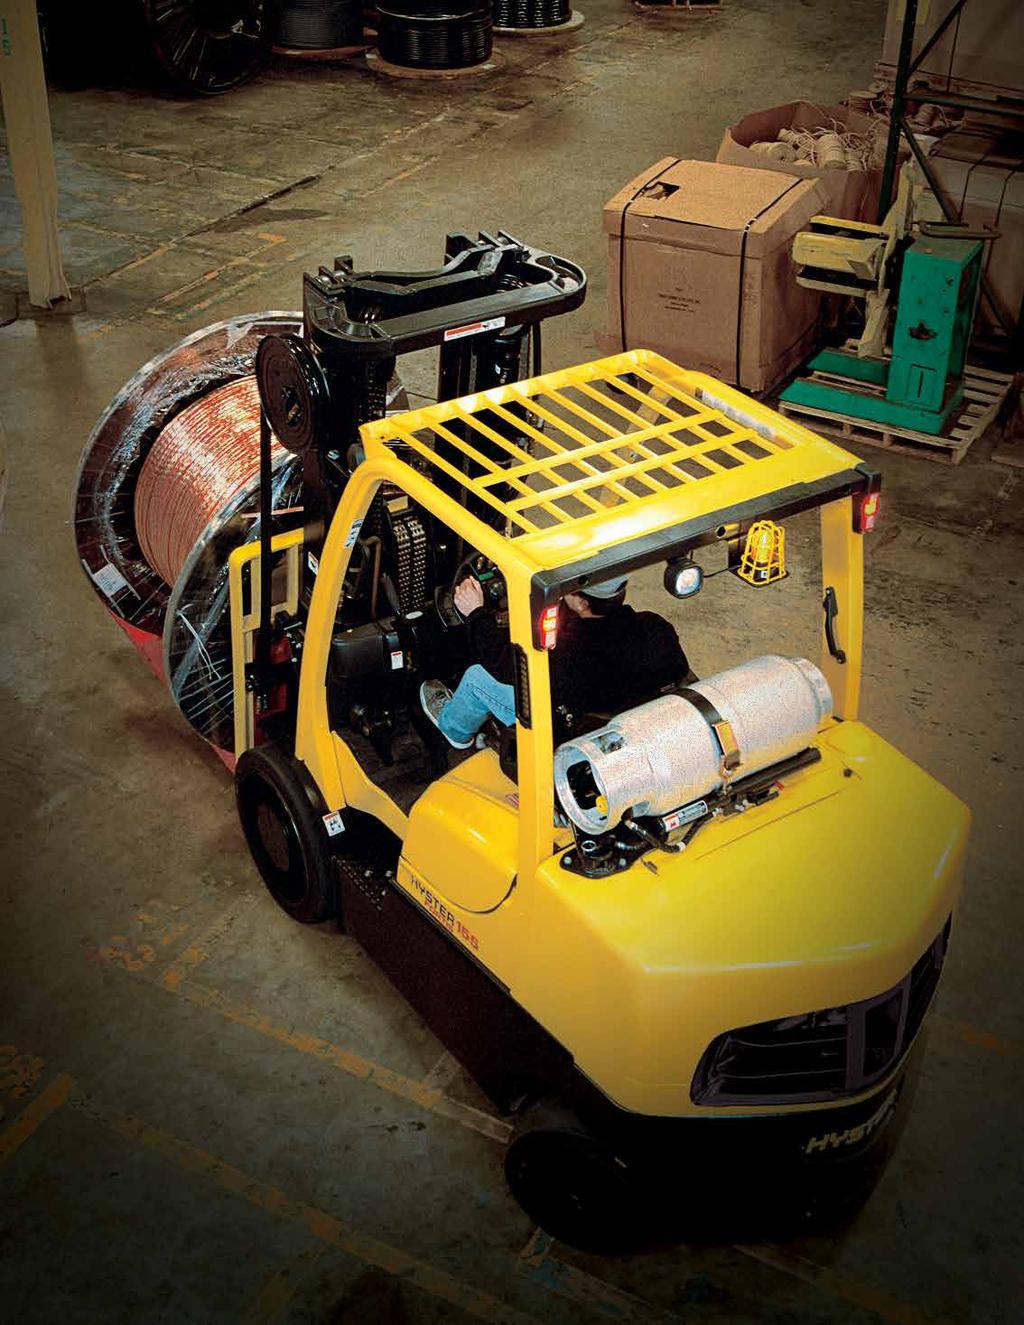 HYSTER VARIABLE POWER TECHNOLOGY TM Optional Hyster Variable Power Technology provides adjustable performance modes that allow customers to maximize productivity or fuel economy to fit their specific